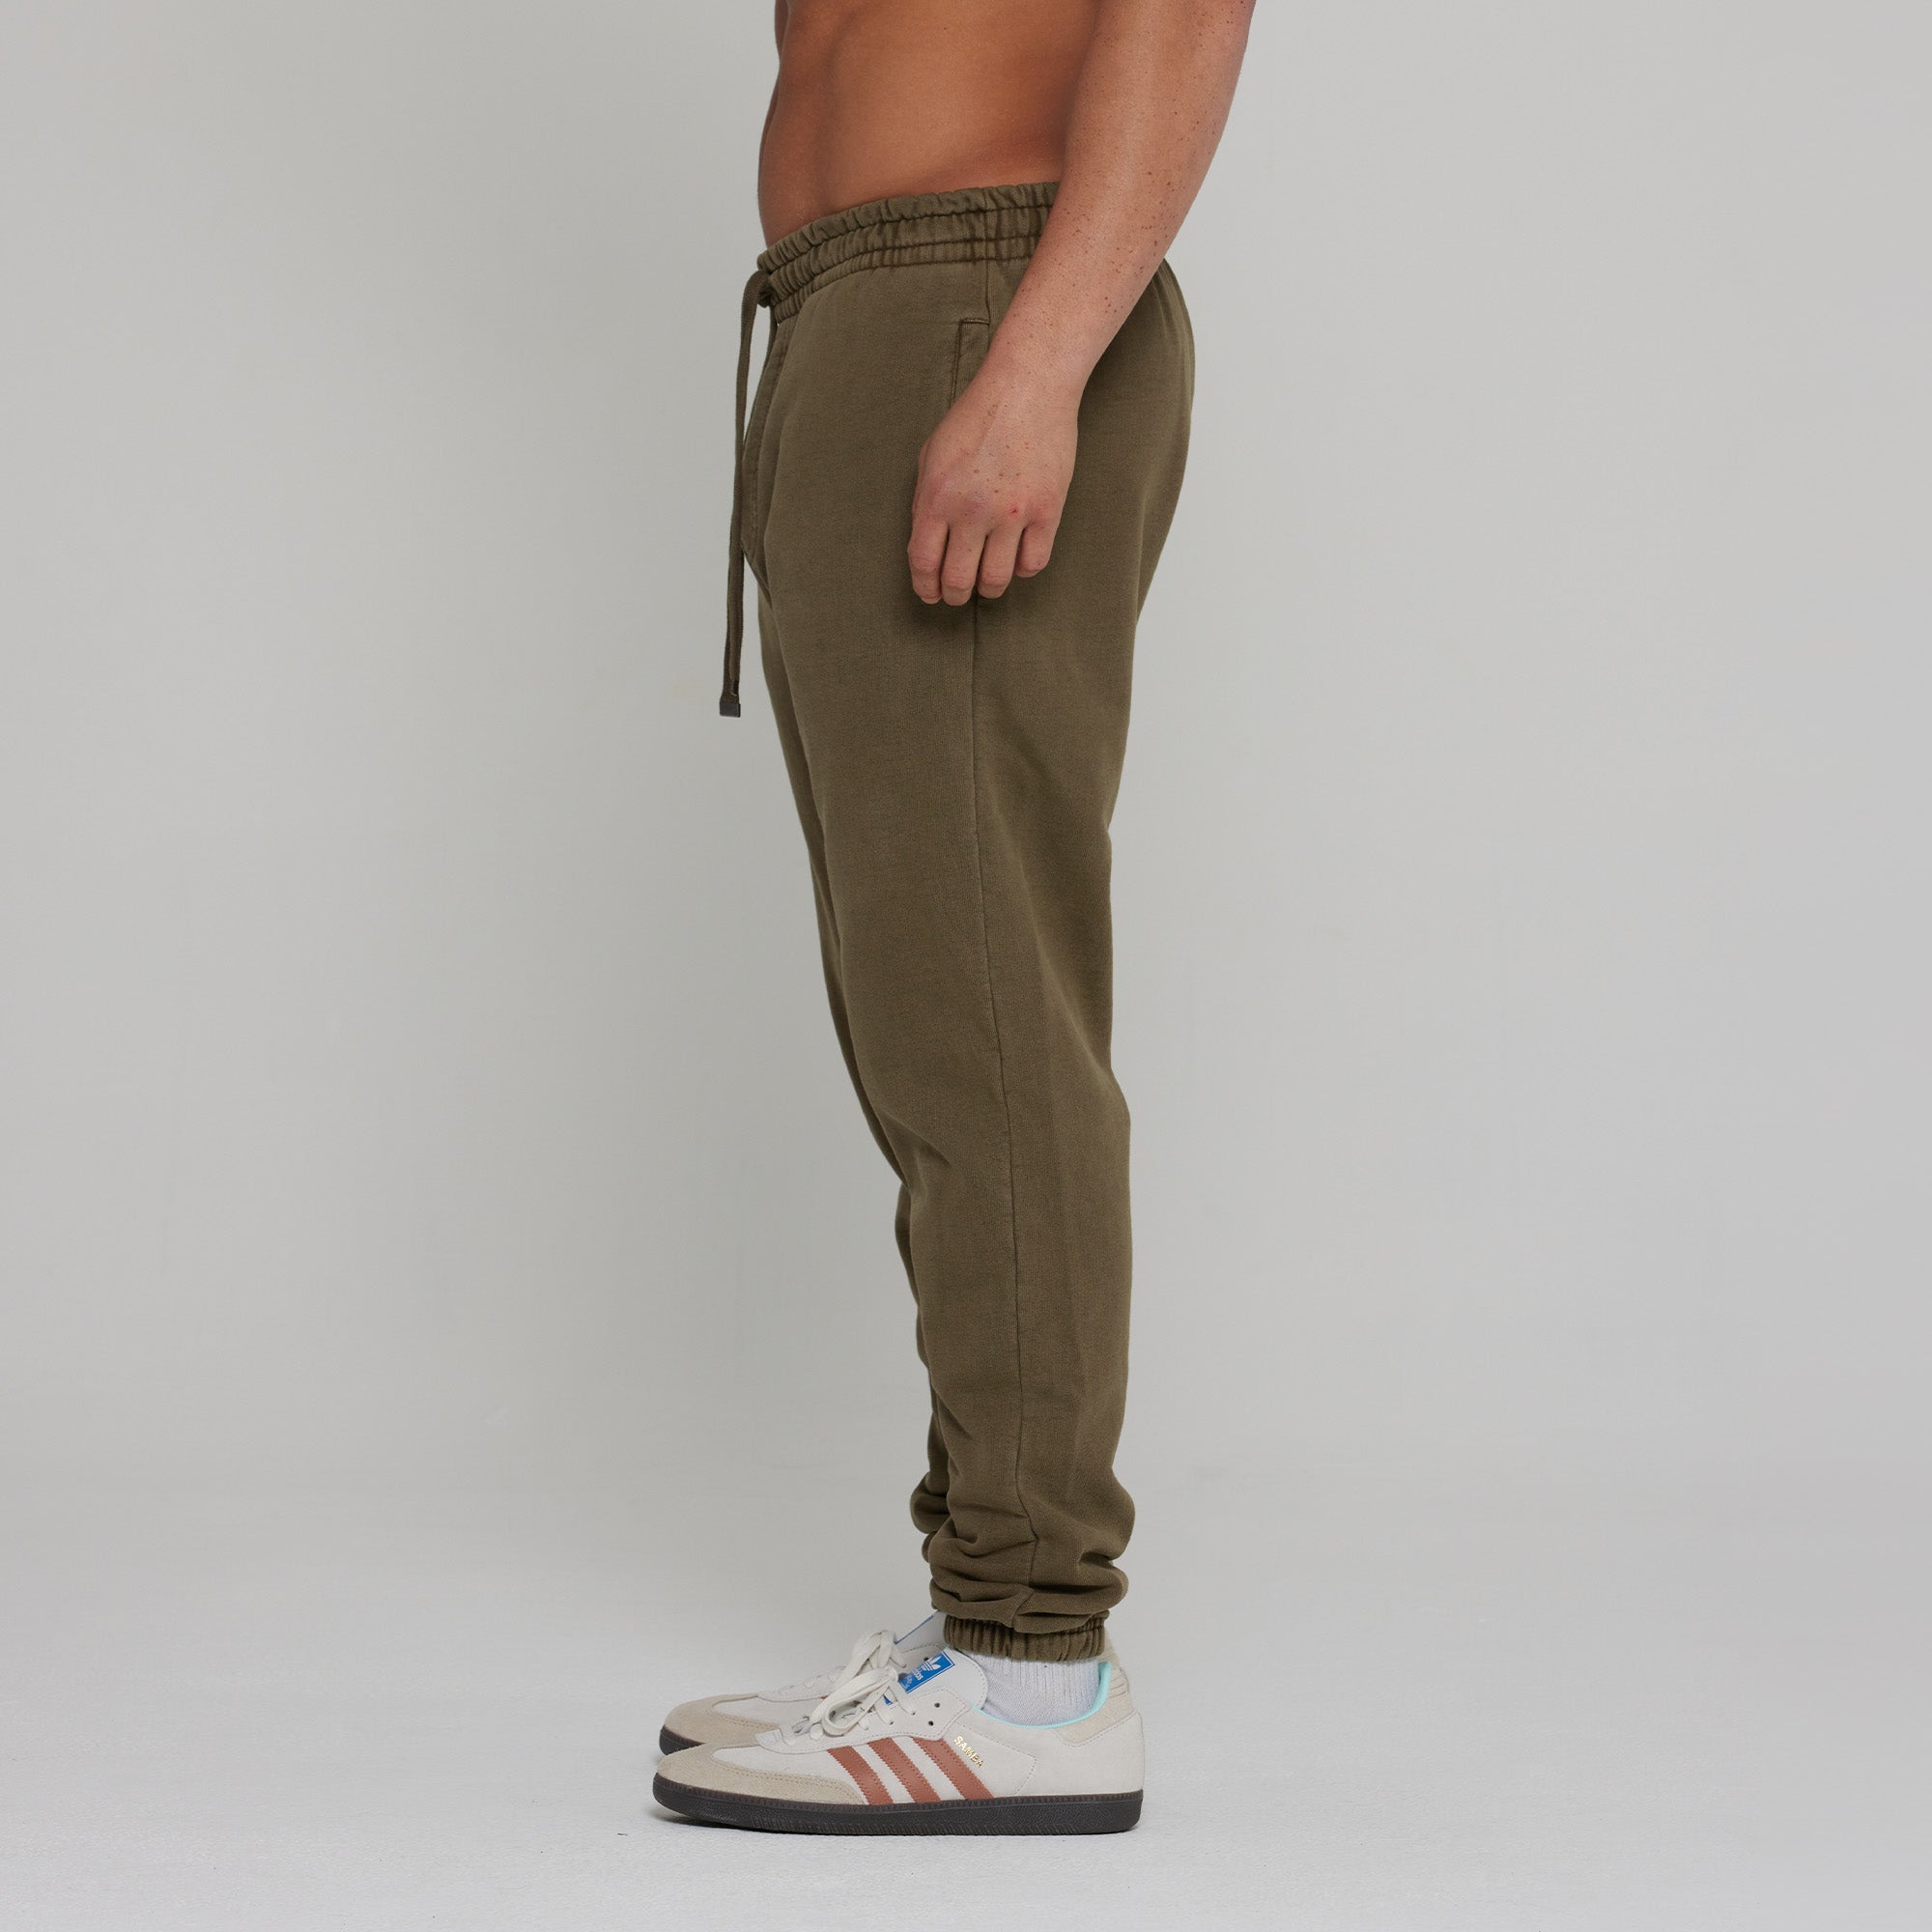 BGSM Men's Loose Fit Winter Sweatpants with Zippered Pockets, Basic, Small  : : Clothing, Shoes & Accessories